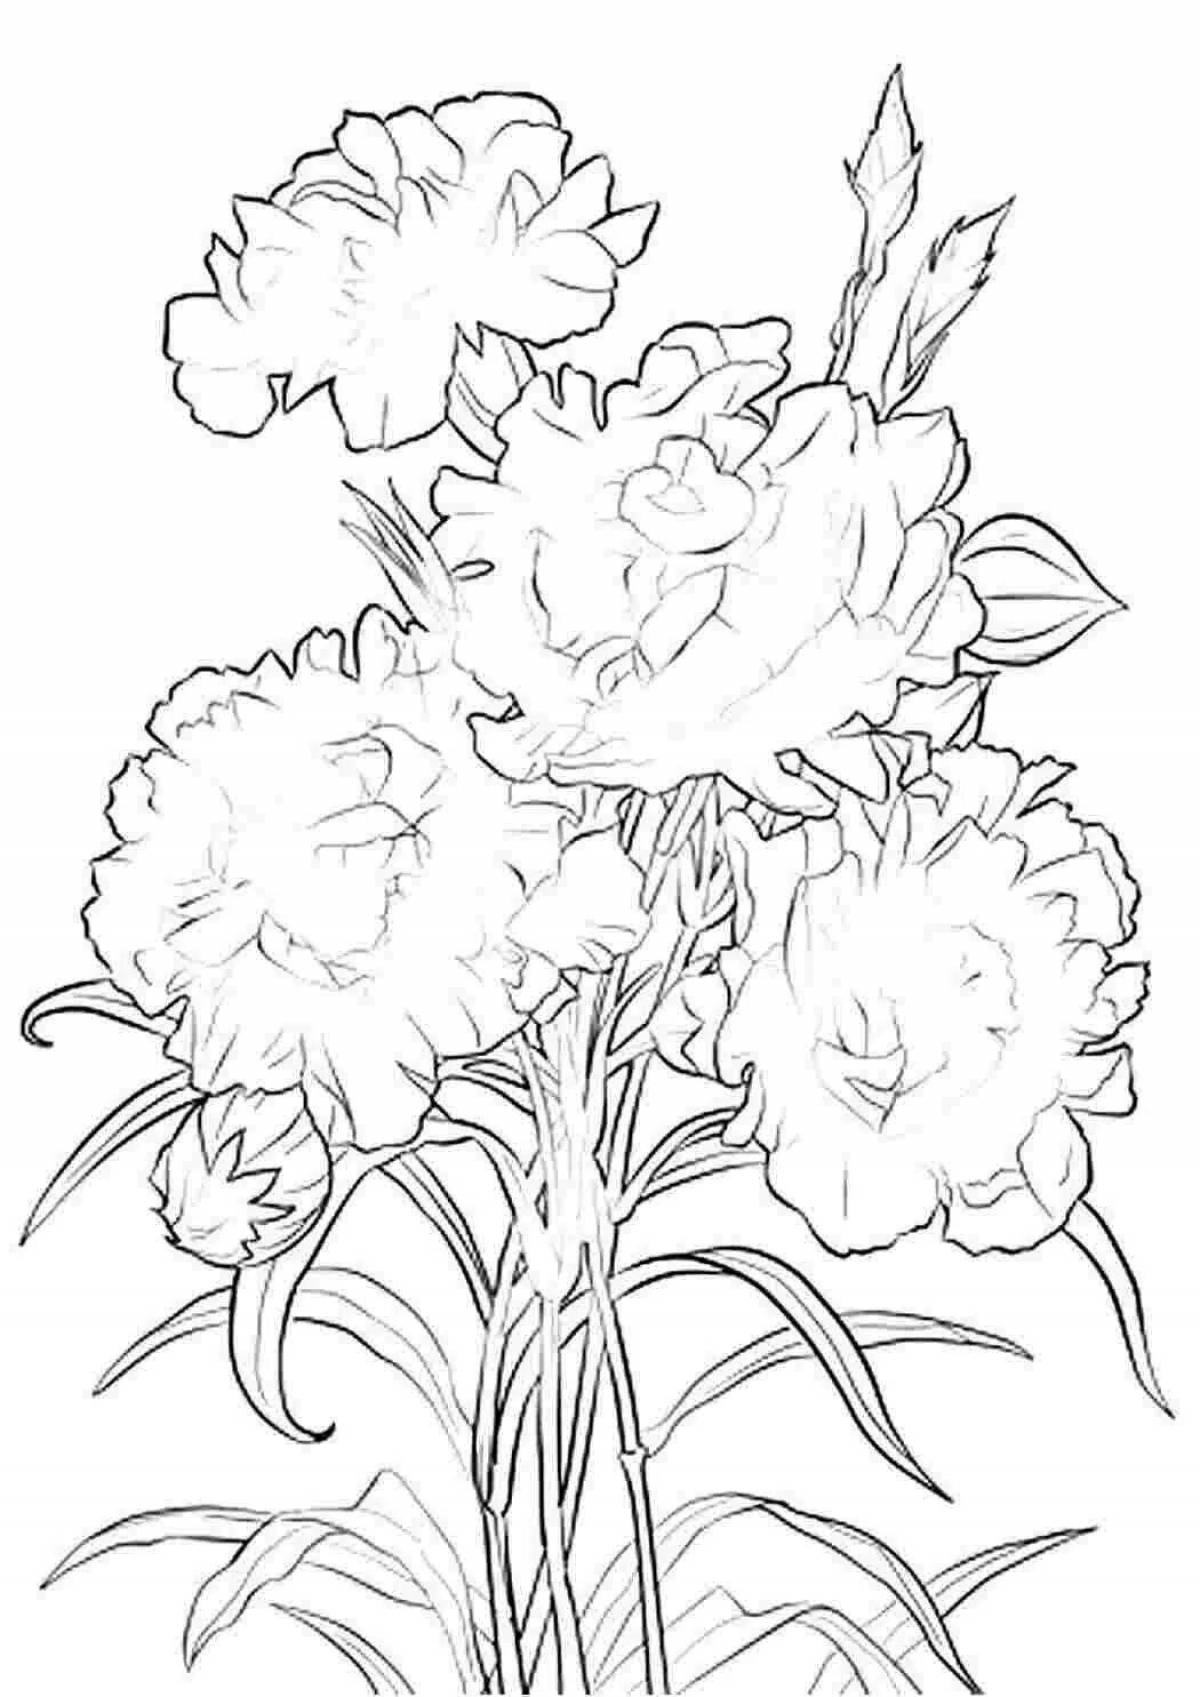 Bewitching bouquet of carnations on May 9th